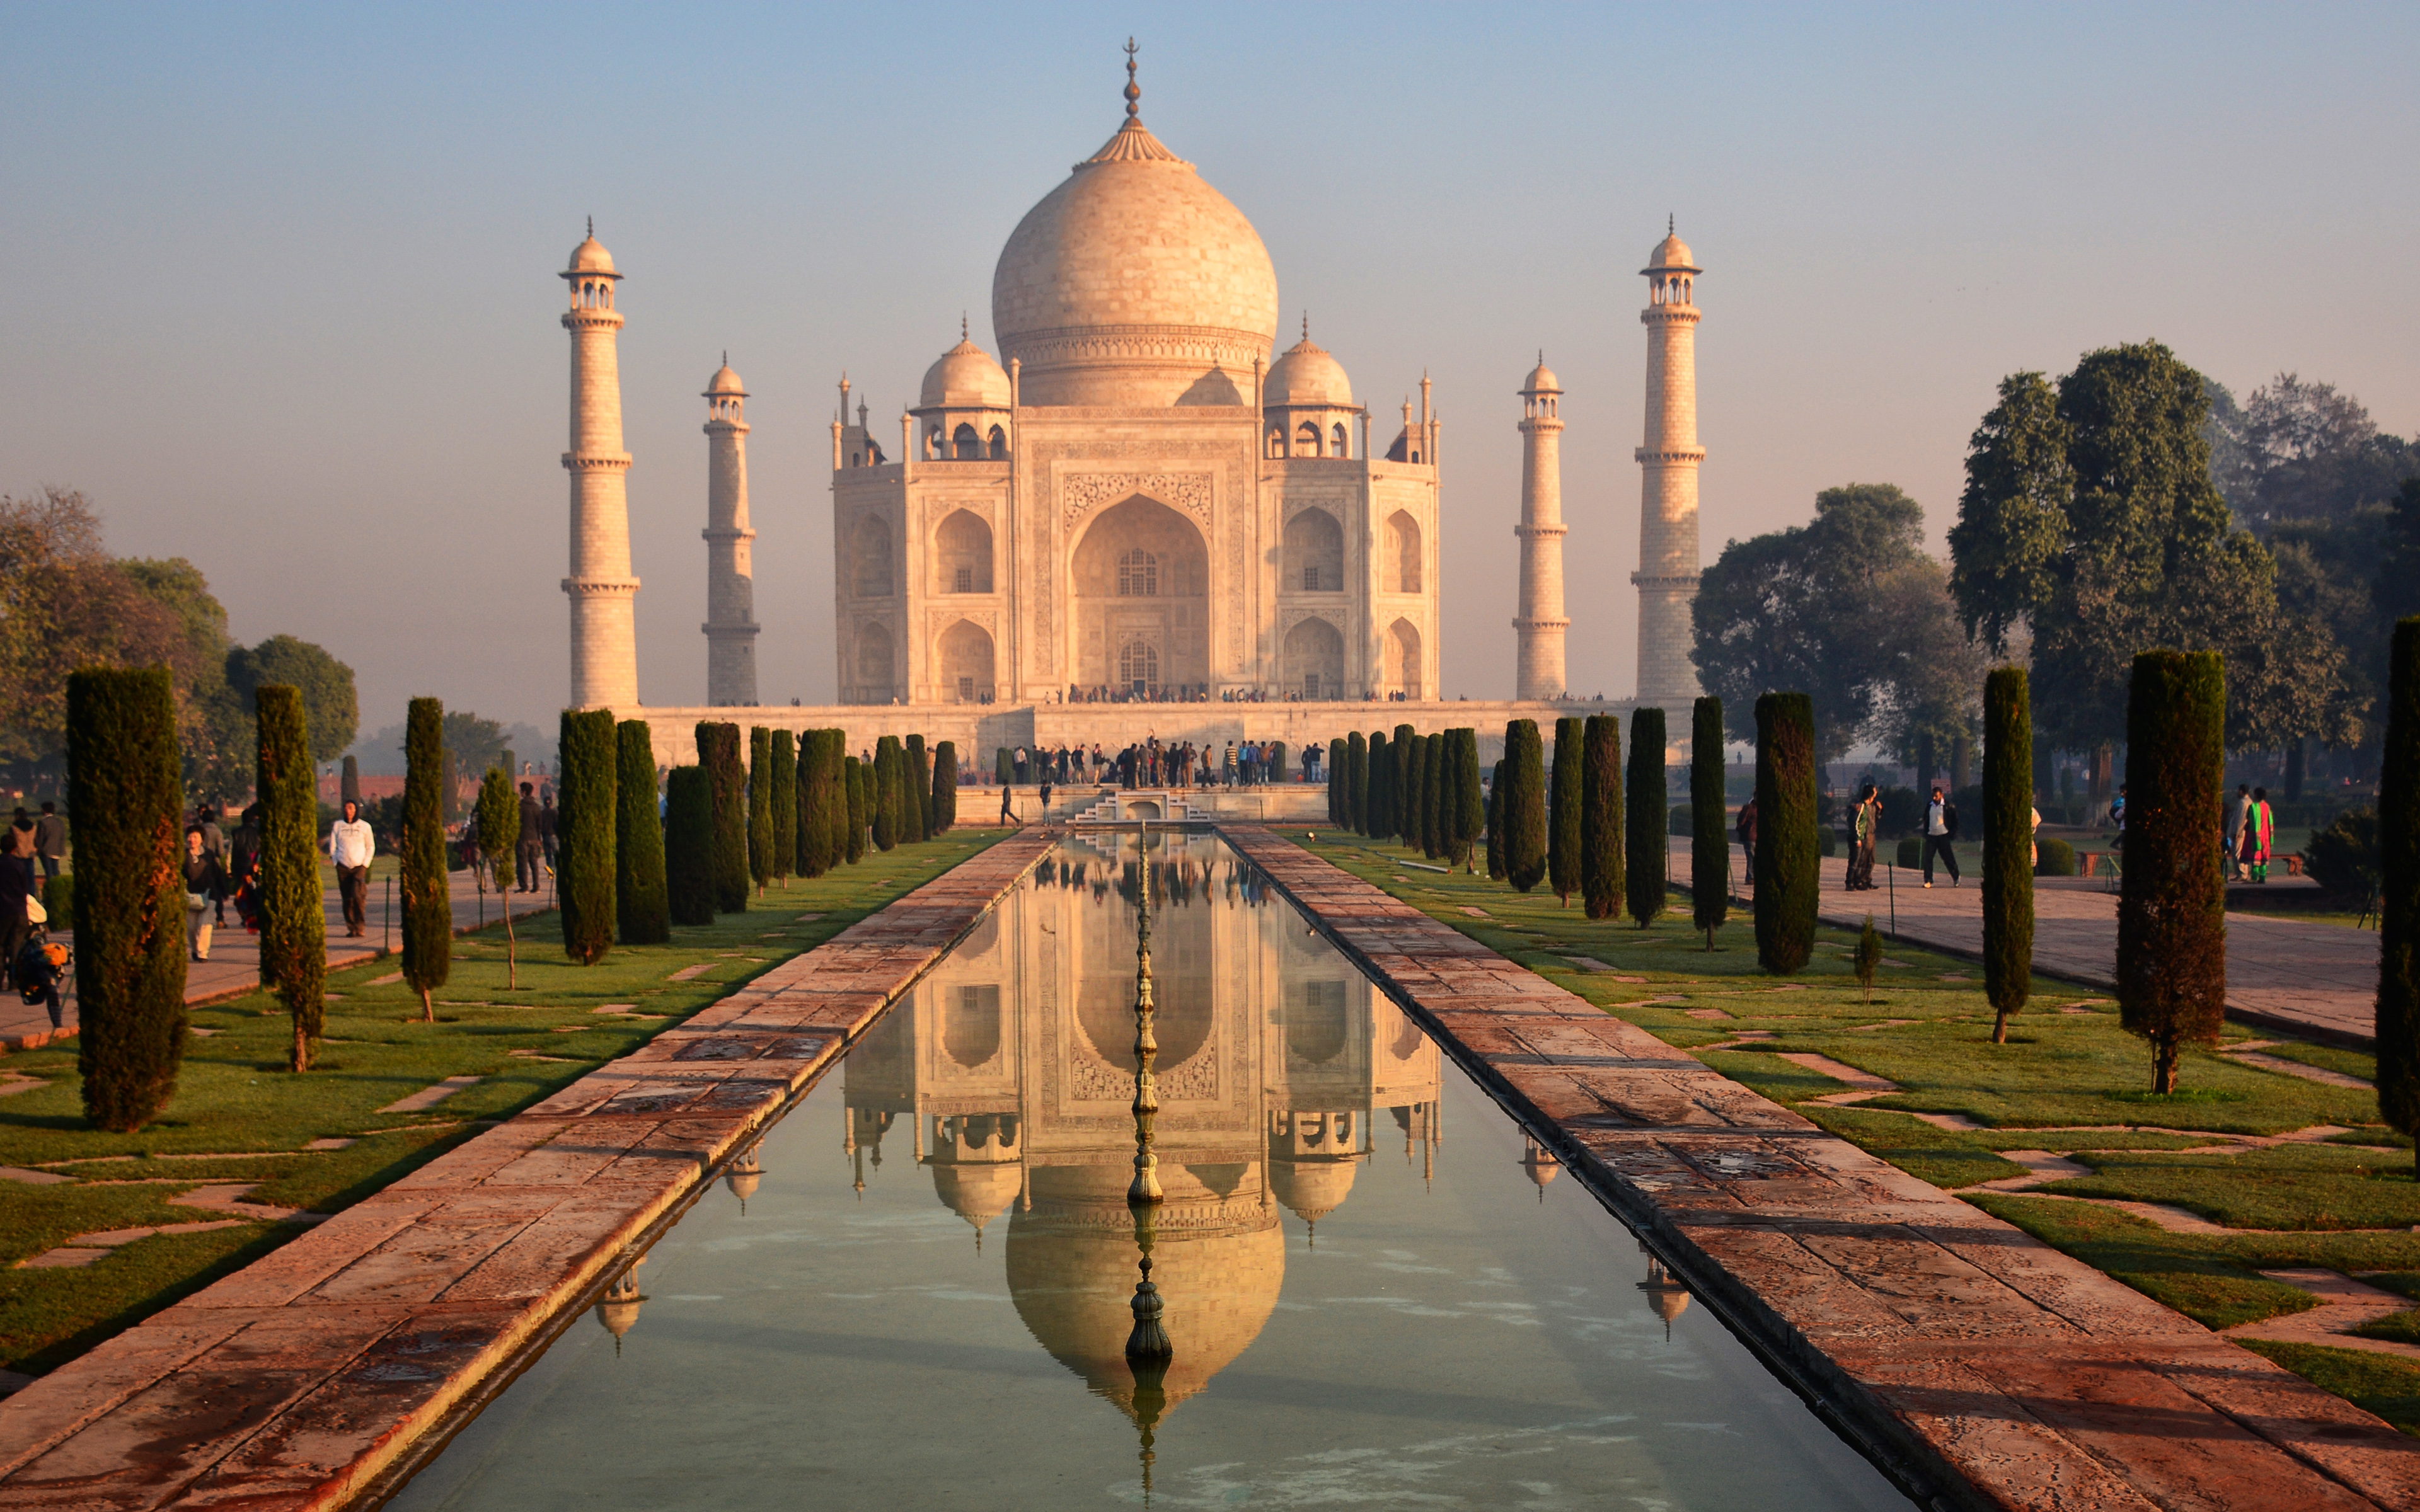 Download Wallpaper Taj Mahal, 4k, Agra, Mausoleum Mosque, River Jamna, Fountain, India For Desktop With Resolution 3840x2400. High Quality HD Picture Wallpaper